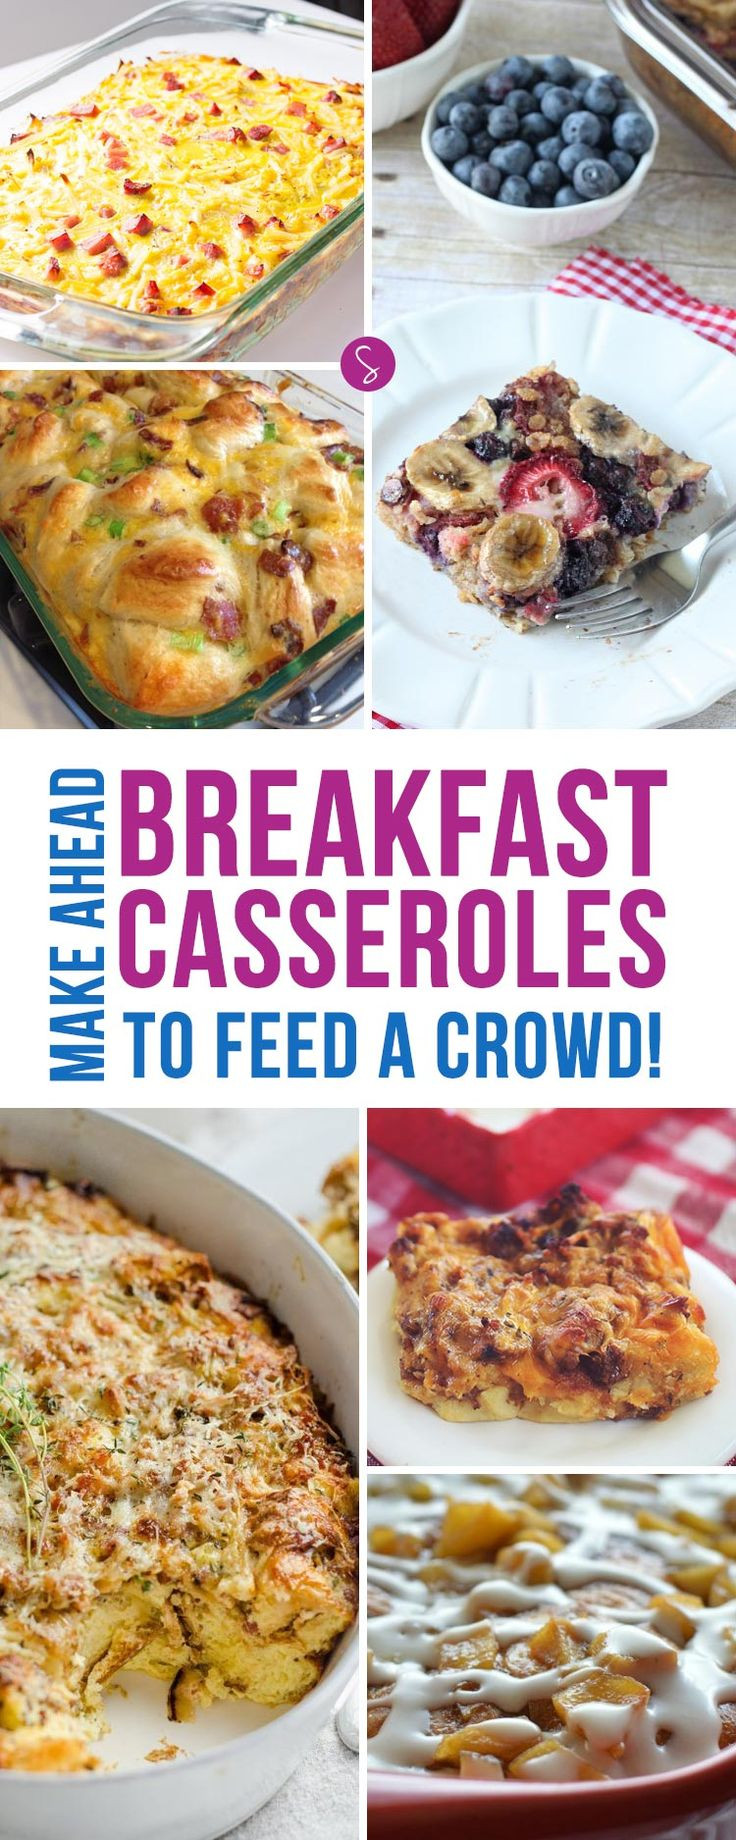 Make Ahead Breakfast Casseroles For A Crowd
 1967 best images about breakfast muffins on Pinterest